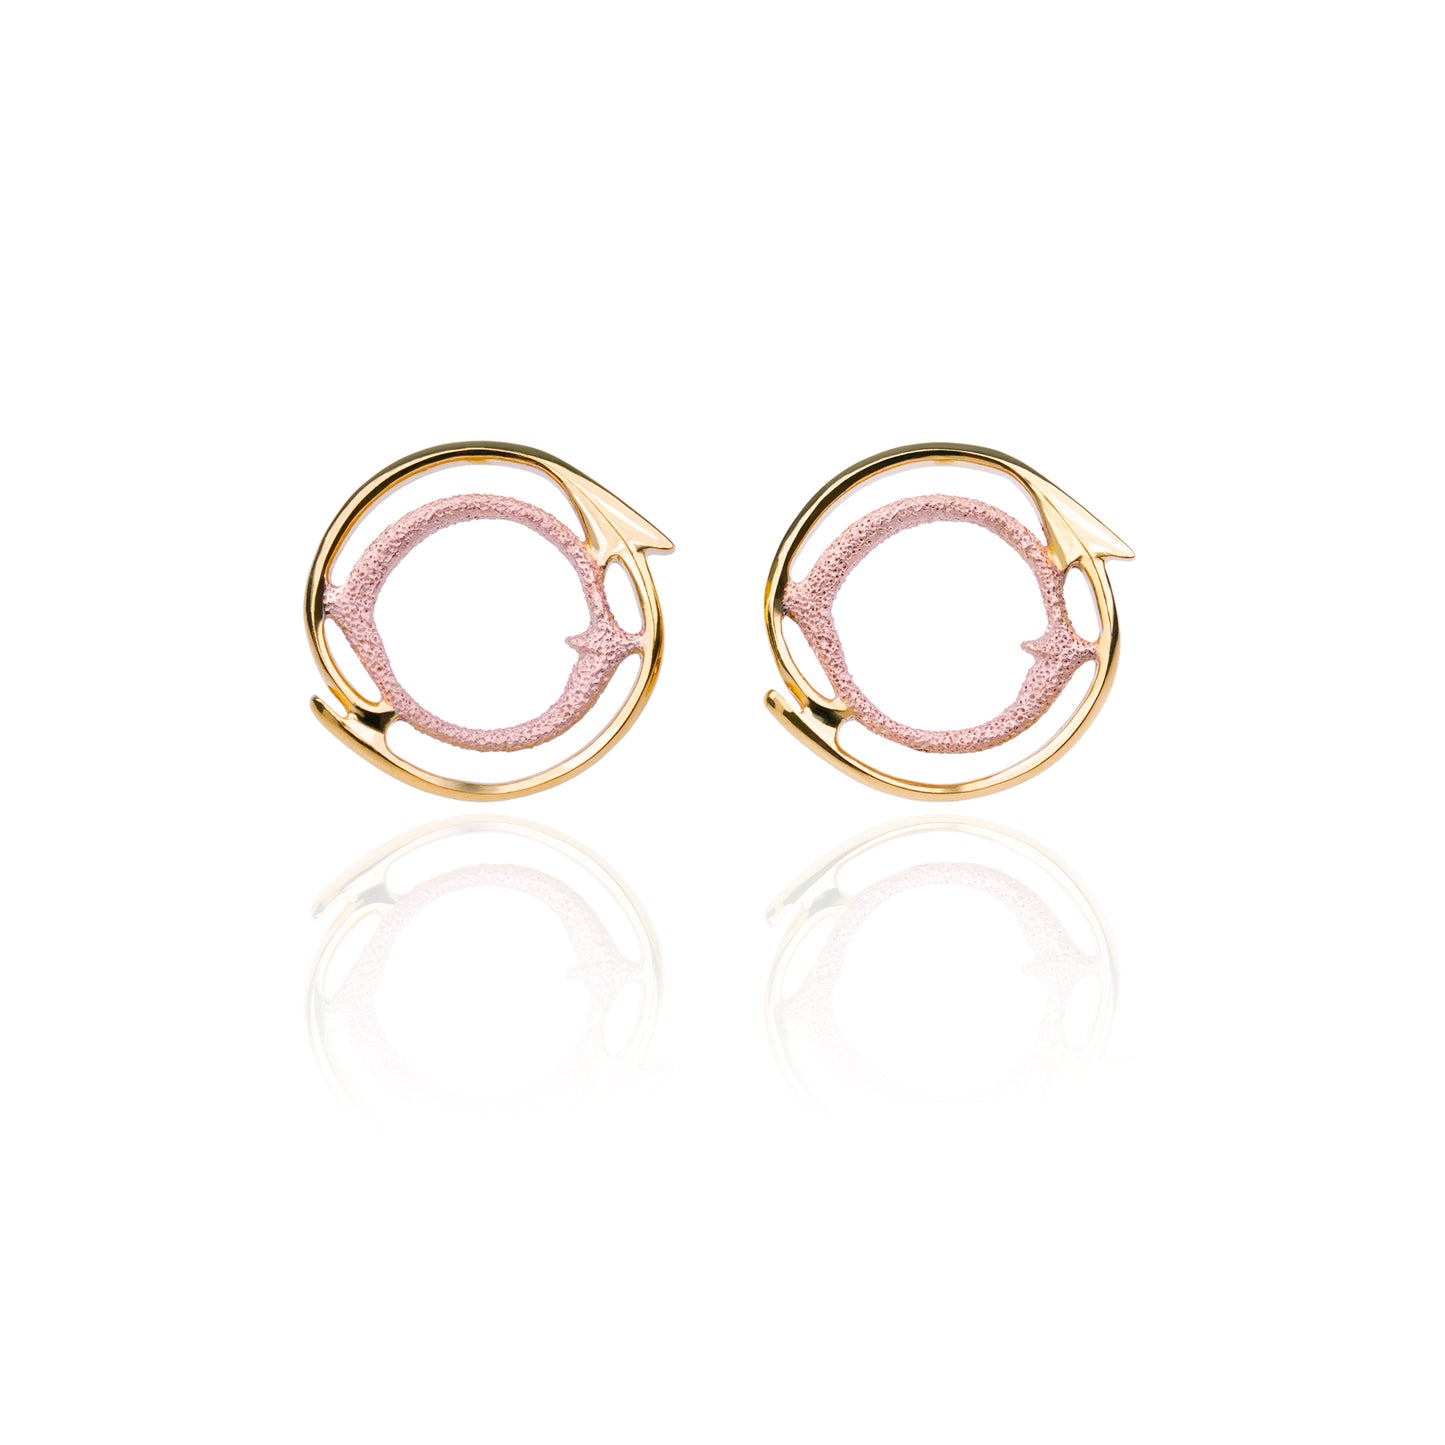 Orme-Brown Contemporary Fine Jewellery ethical Sunset Small halo stud earrings in sustainable recycled silver with gold plating